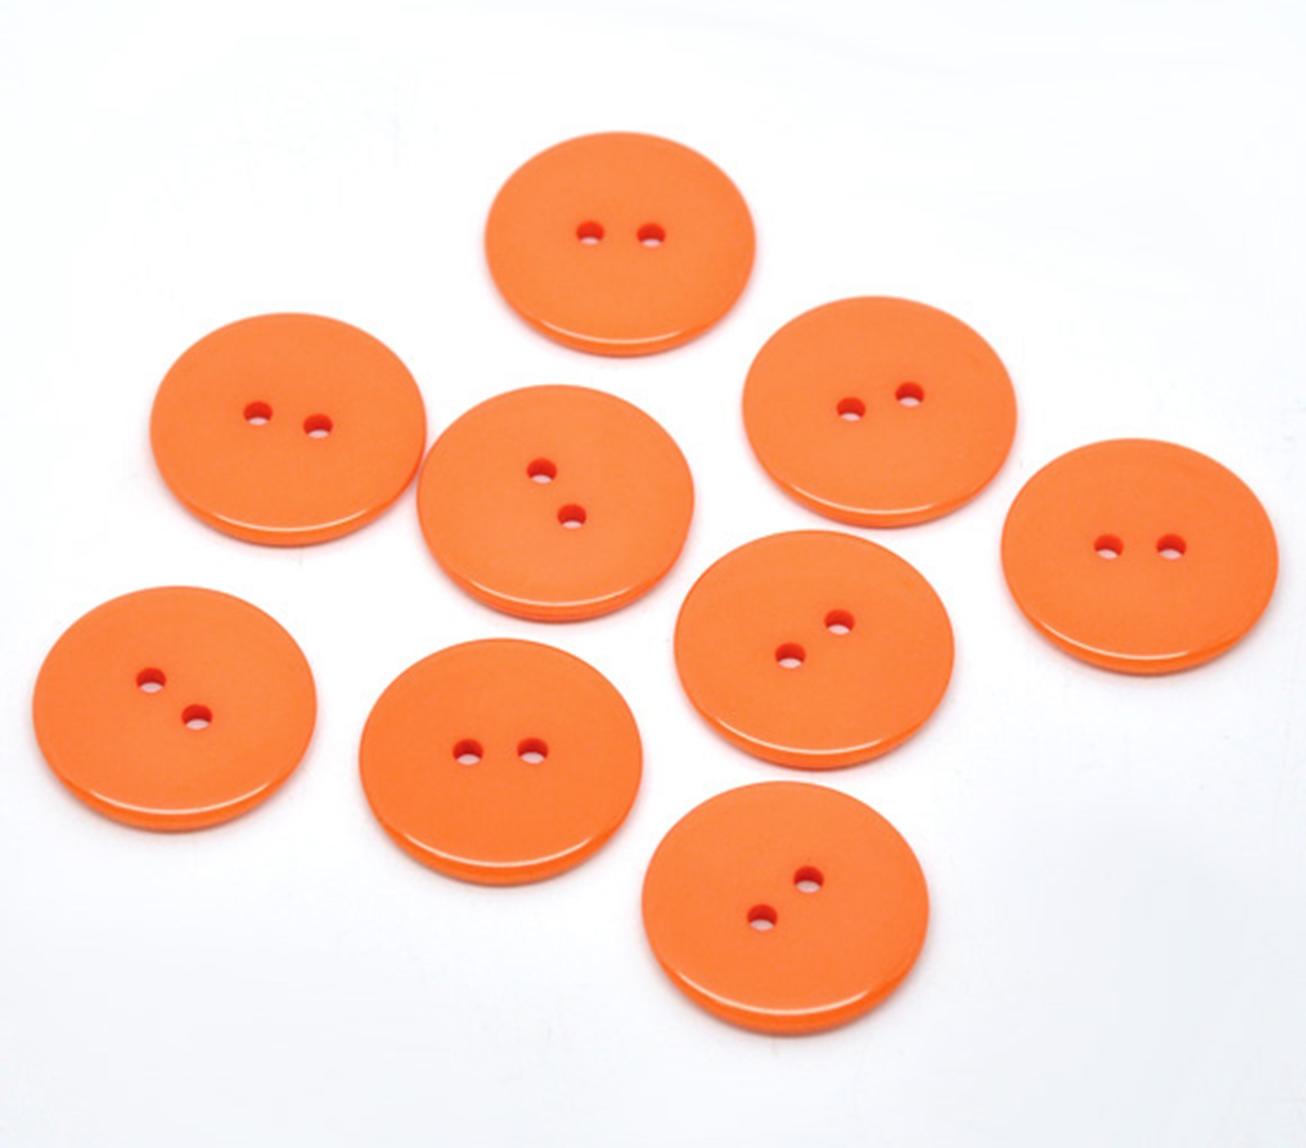 Orange 23mm round large resin sewing buttons